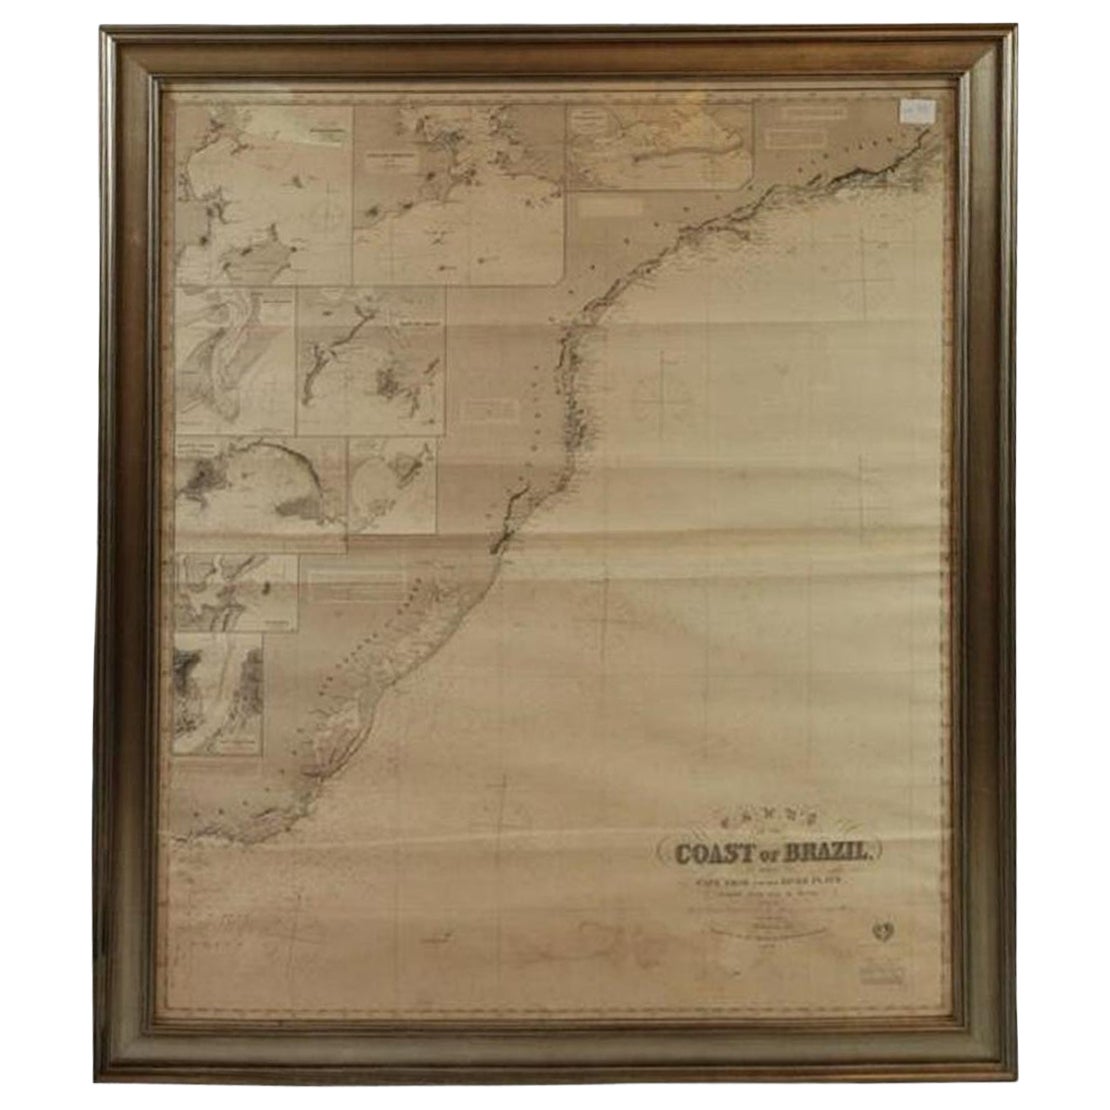 Imray Ocean Chart of the Coast of Brazil 1876 For Sale